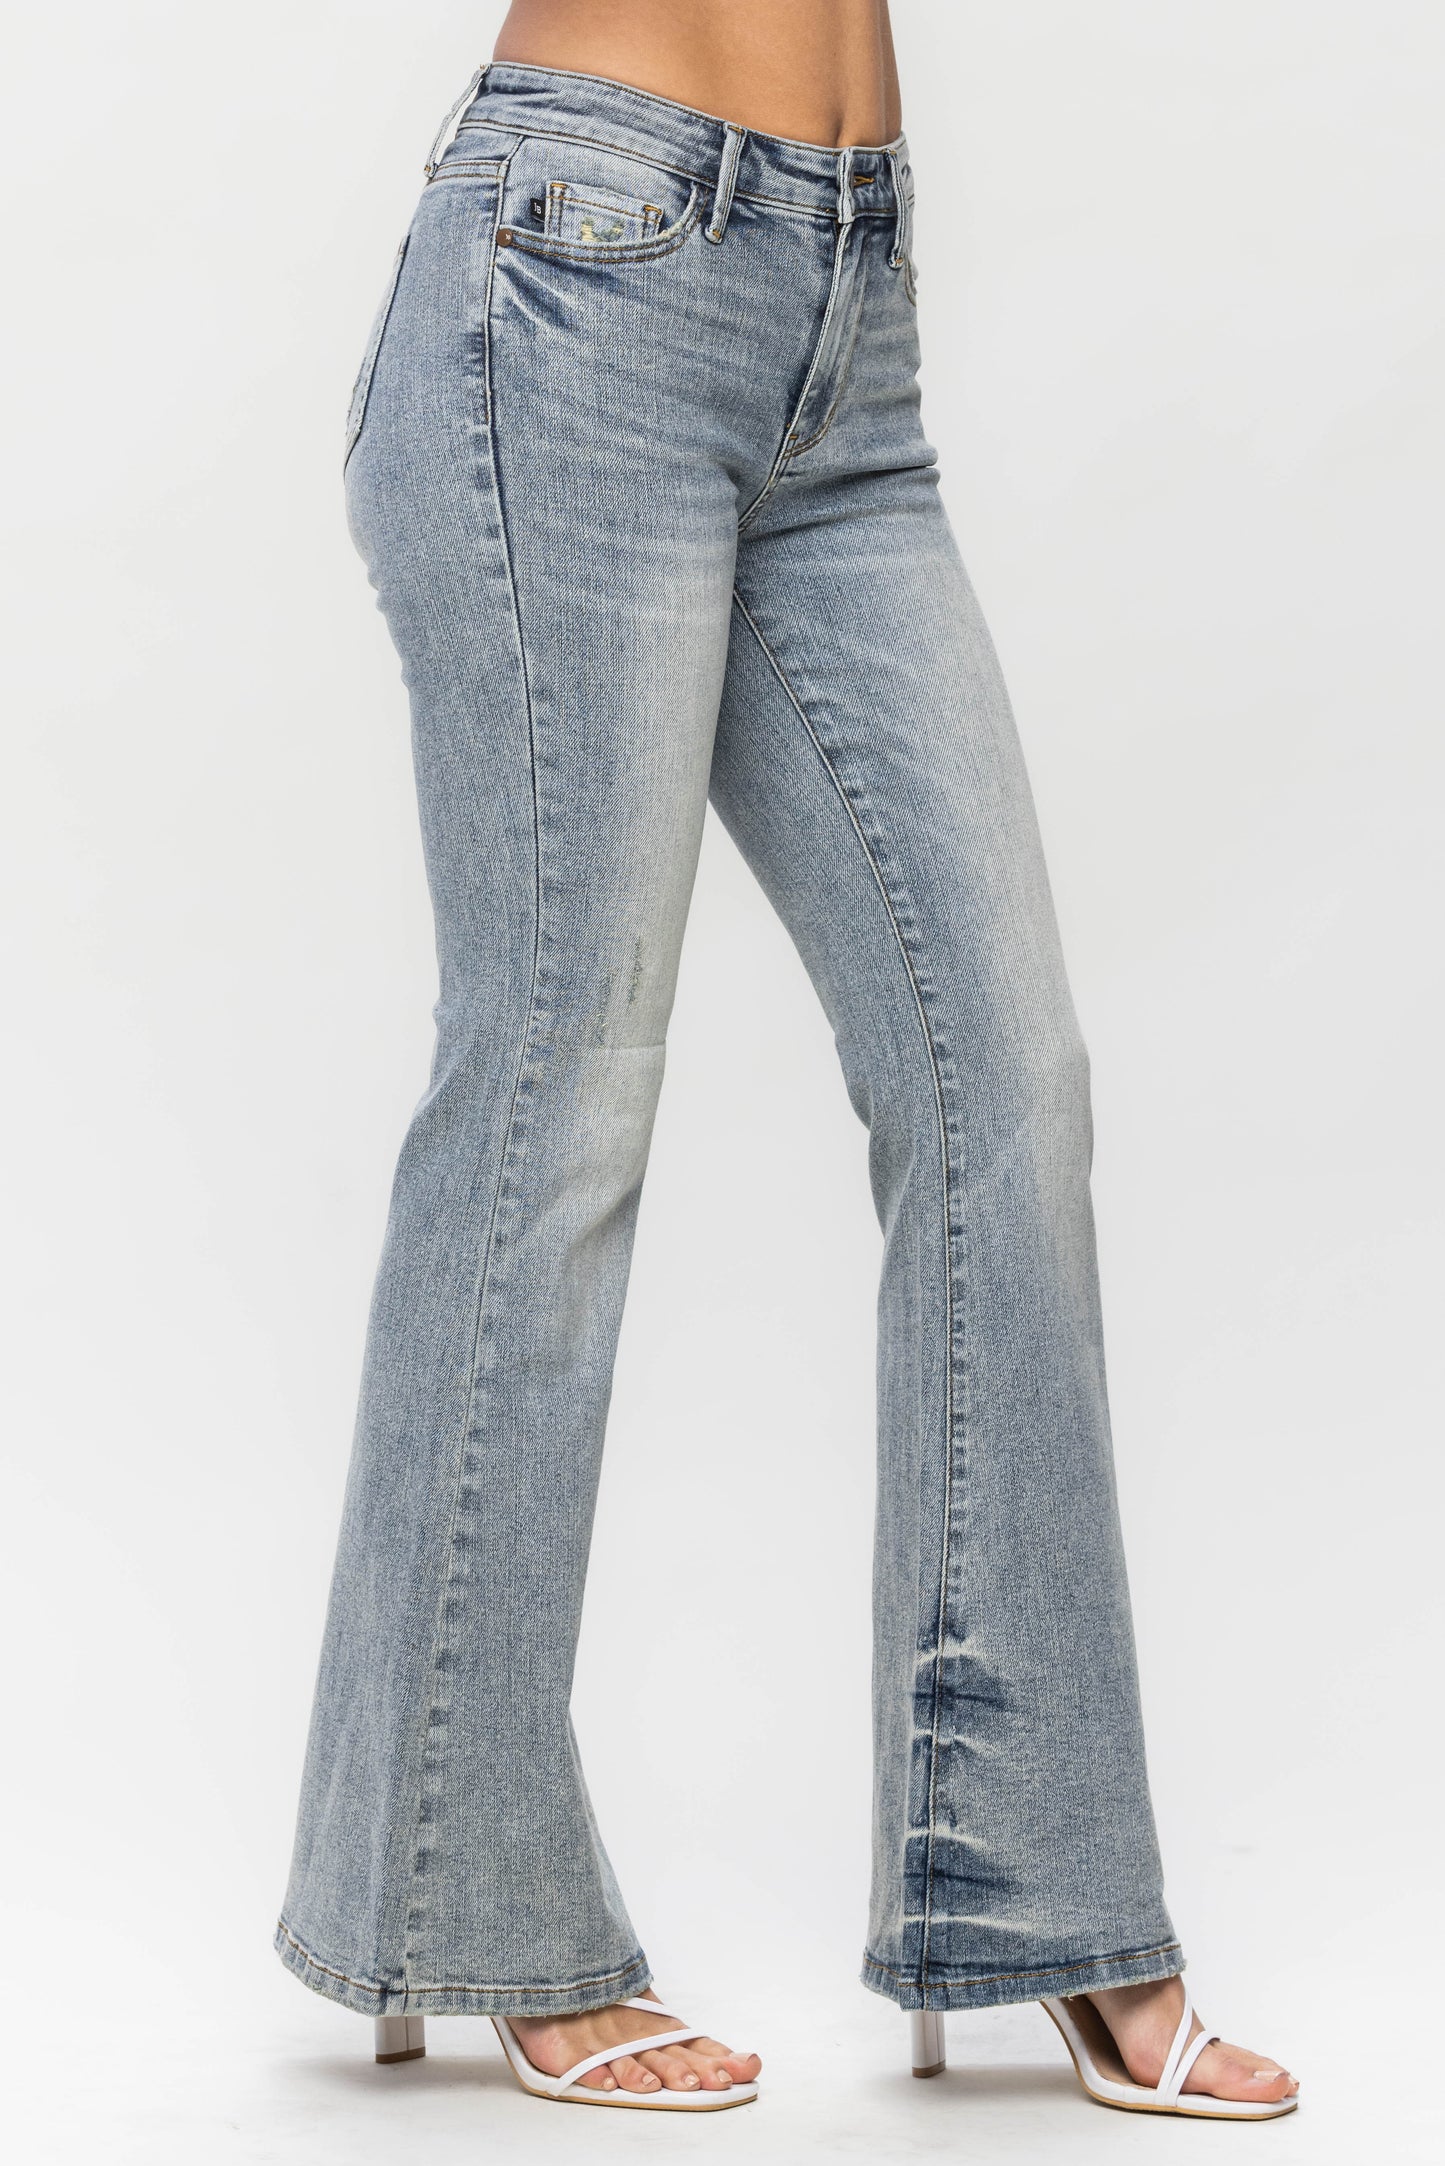 Easy Come Easy Go Judy Blue Jeans